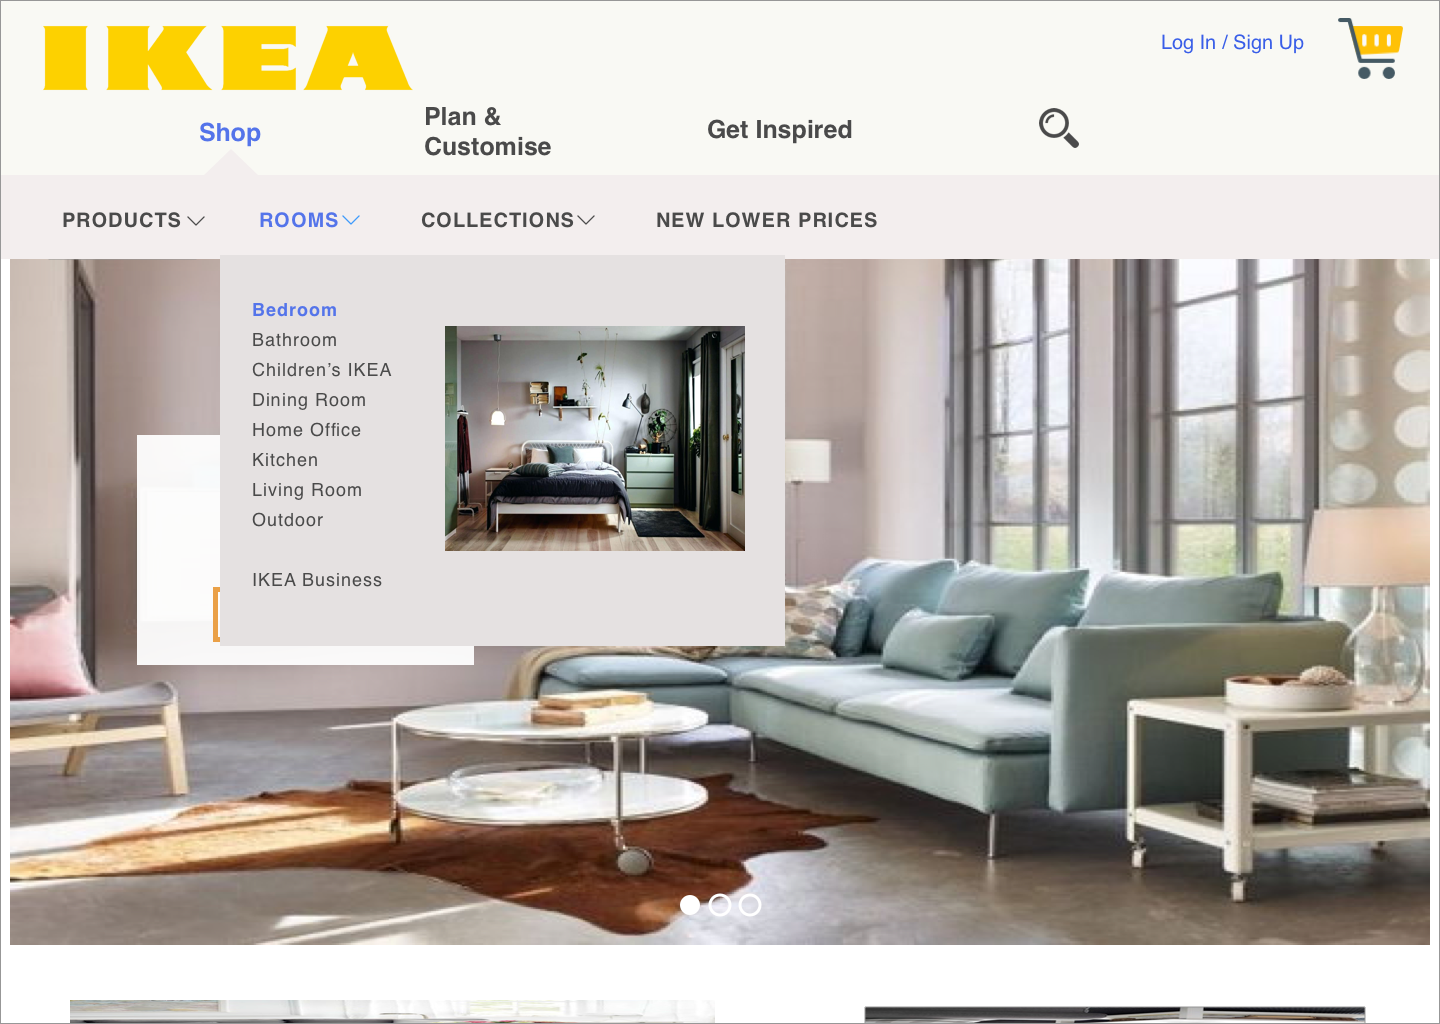 I love you IKEA, but why is your website so…? by Maria Rachelle Santos | UX Collective